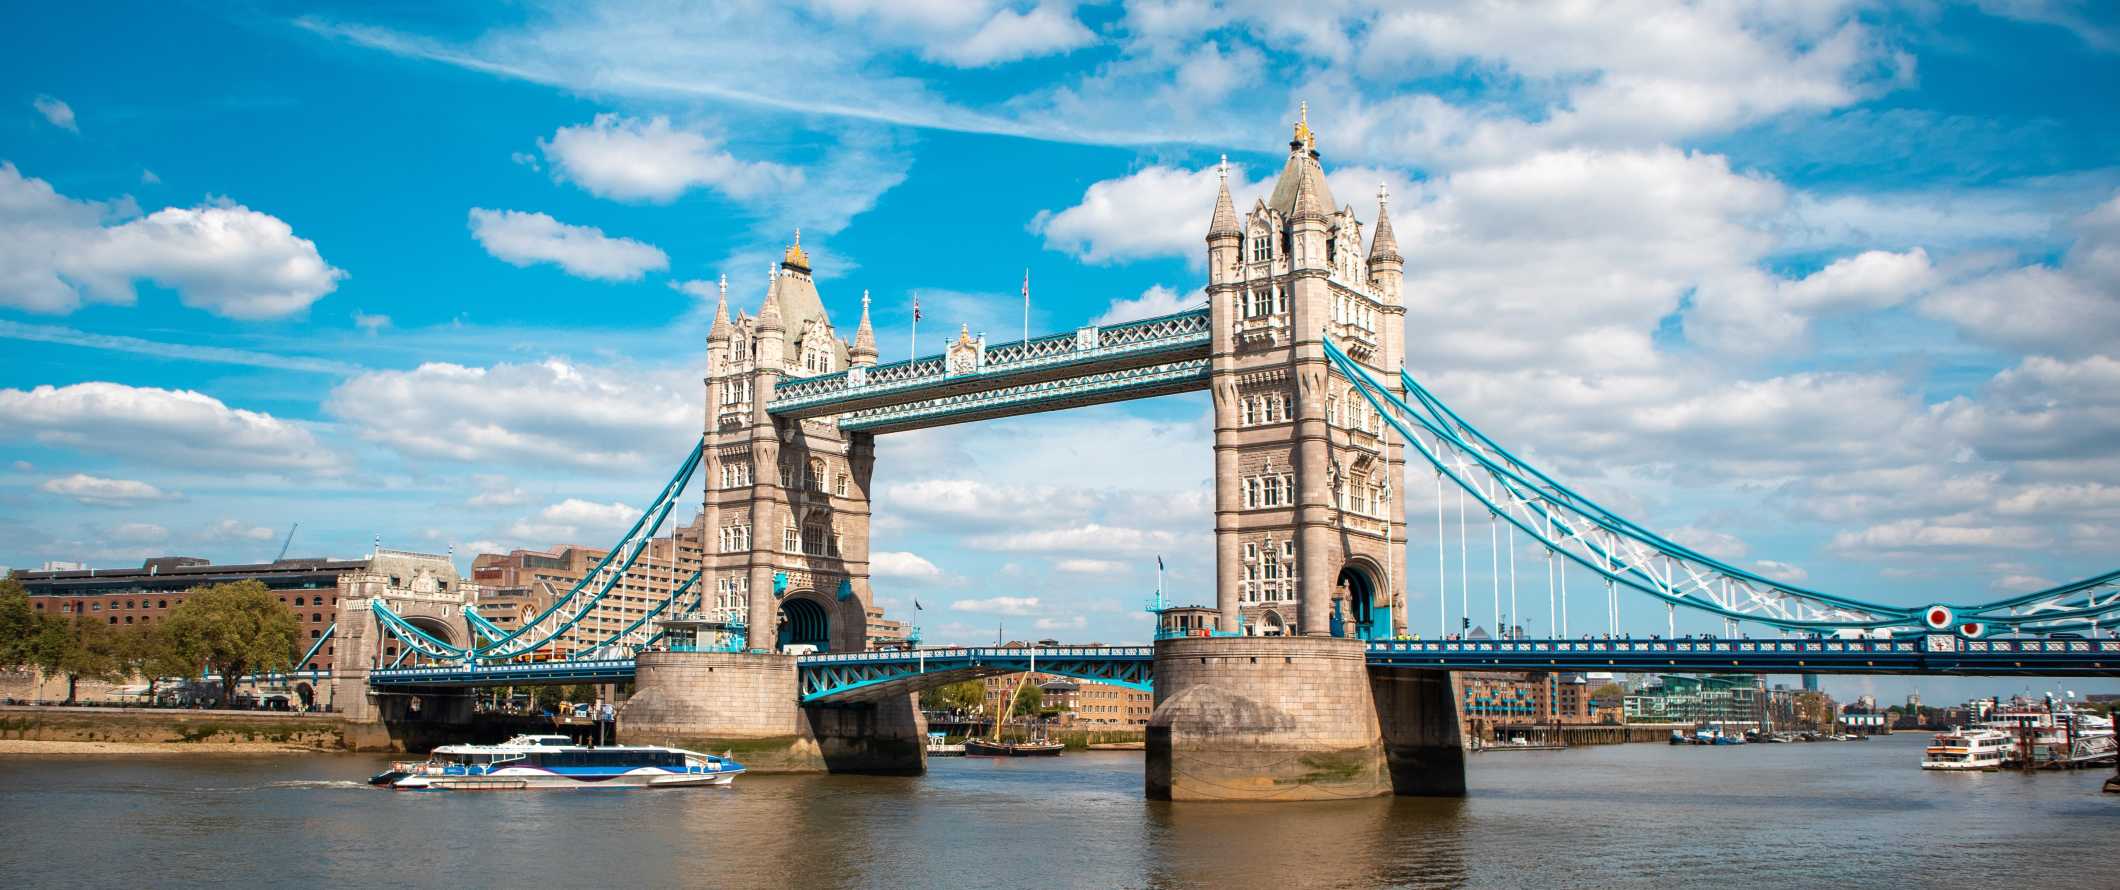 View of the famous Tower Bridge spanning across the River Thames in London, England